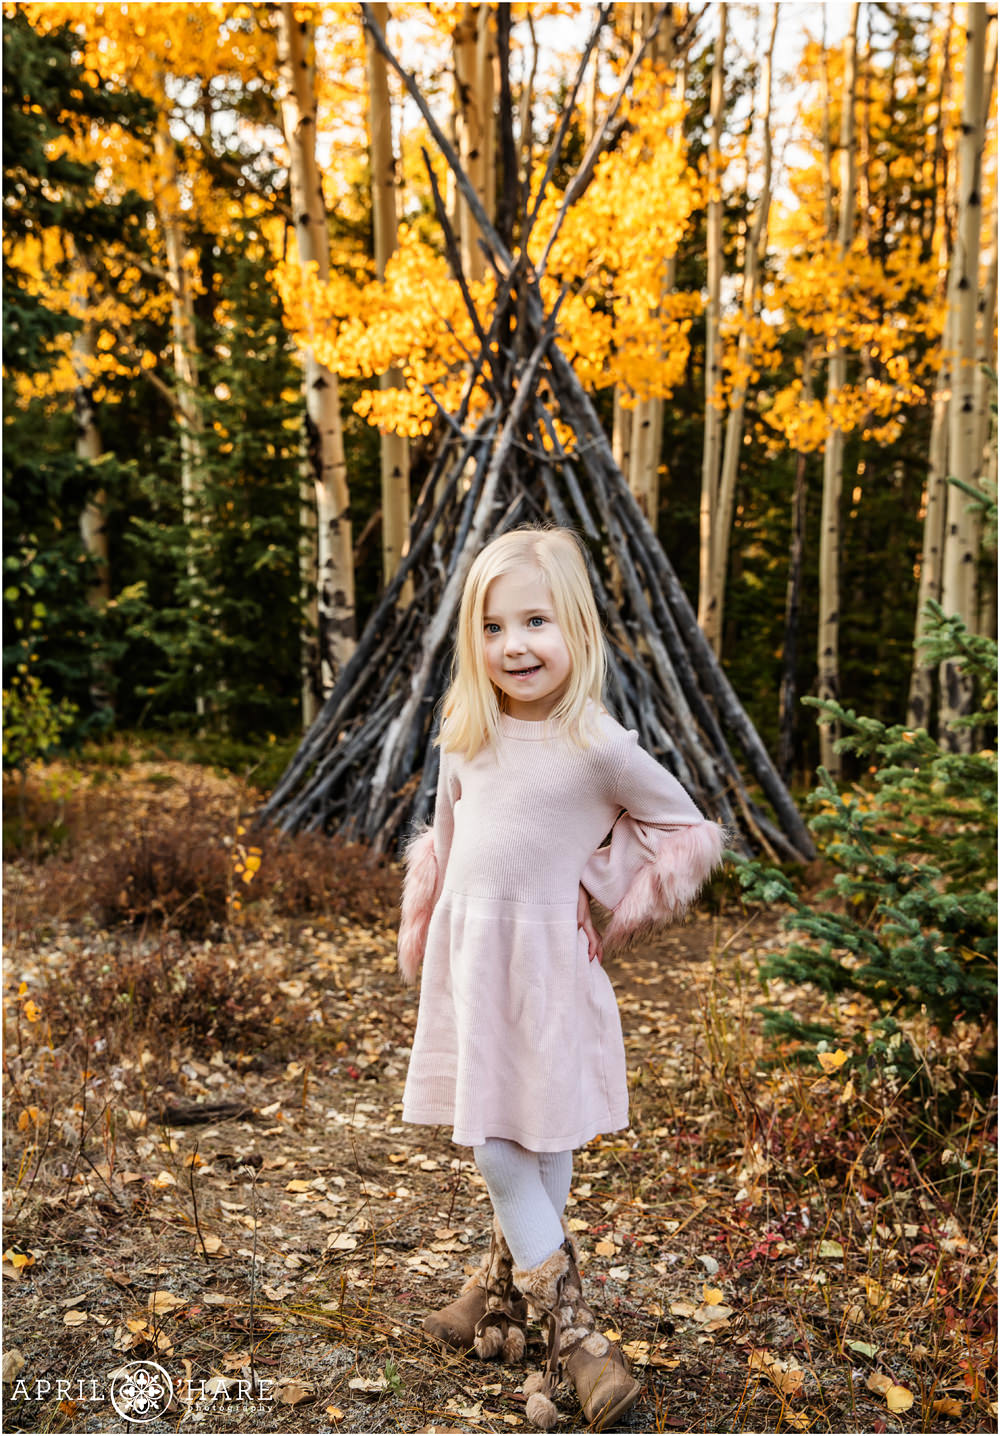 Adorable little blonde girl wearing a light pink dress poses in the fall color on Squaw Pass Road